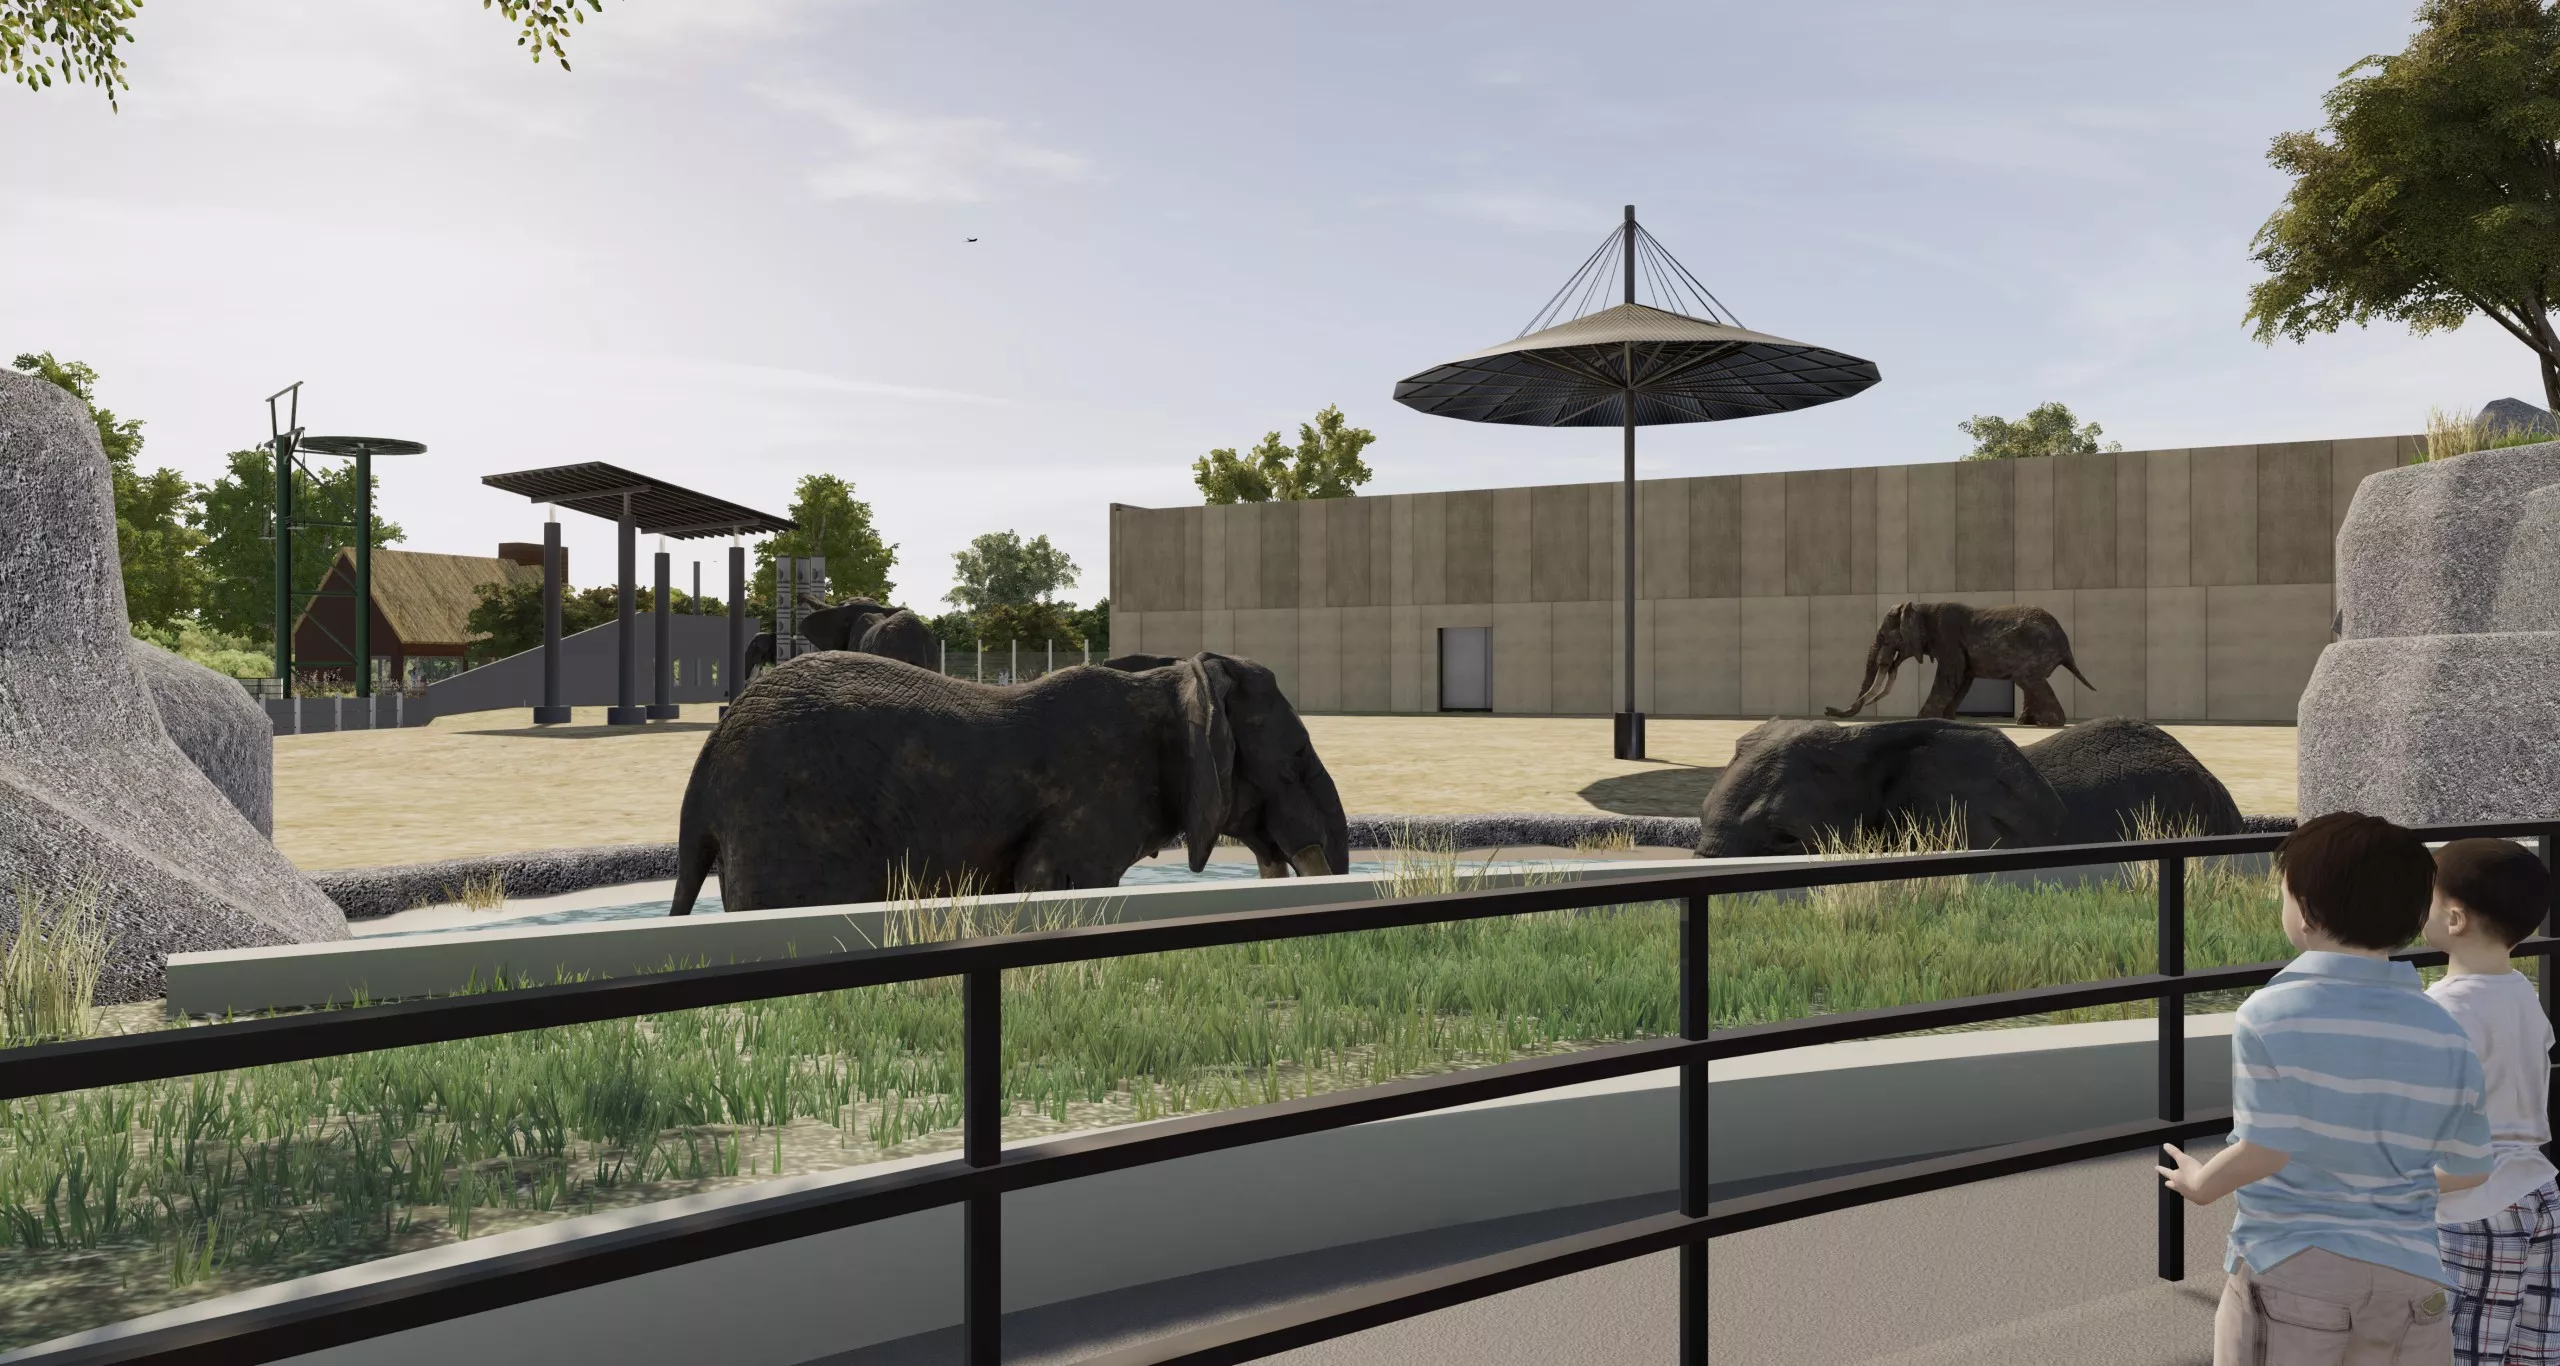 Zoological Society of Milwaukee in USA, North America | Zoos & Sanctuaries - Rated 3.7